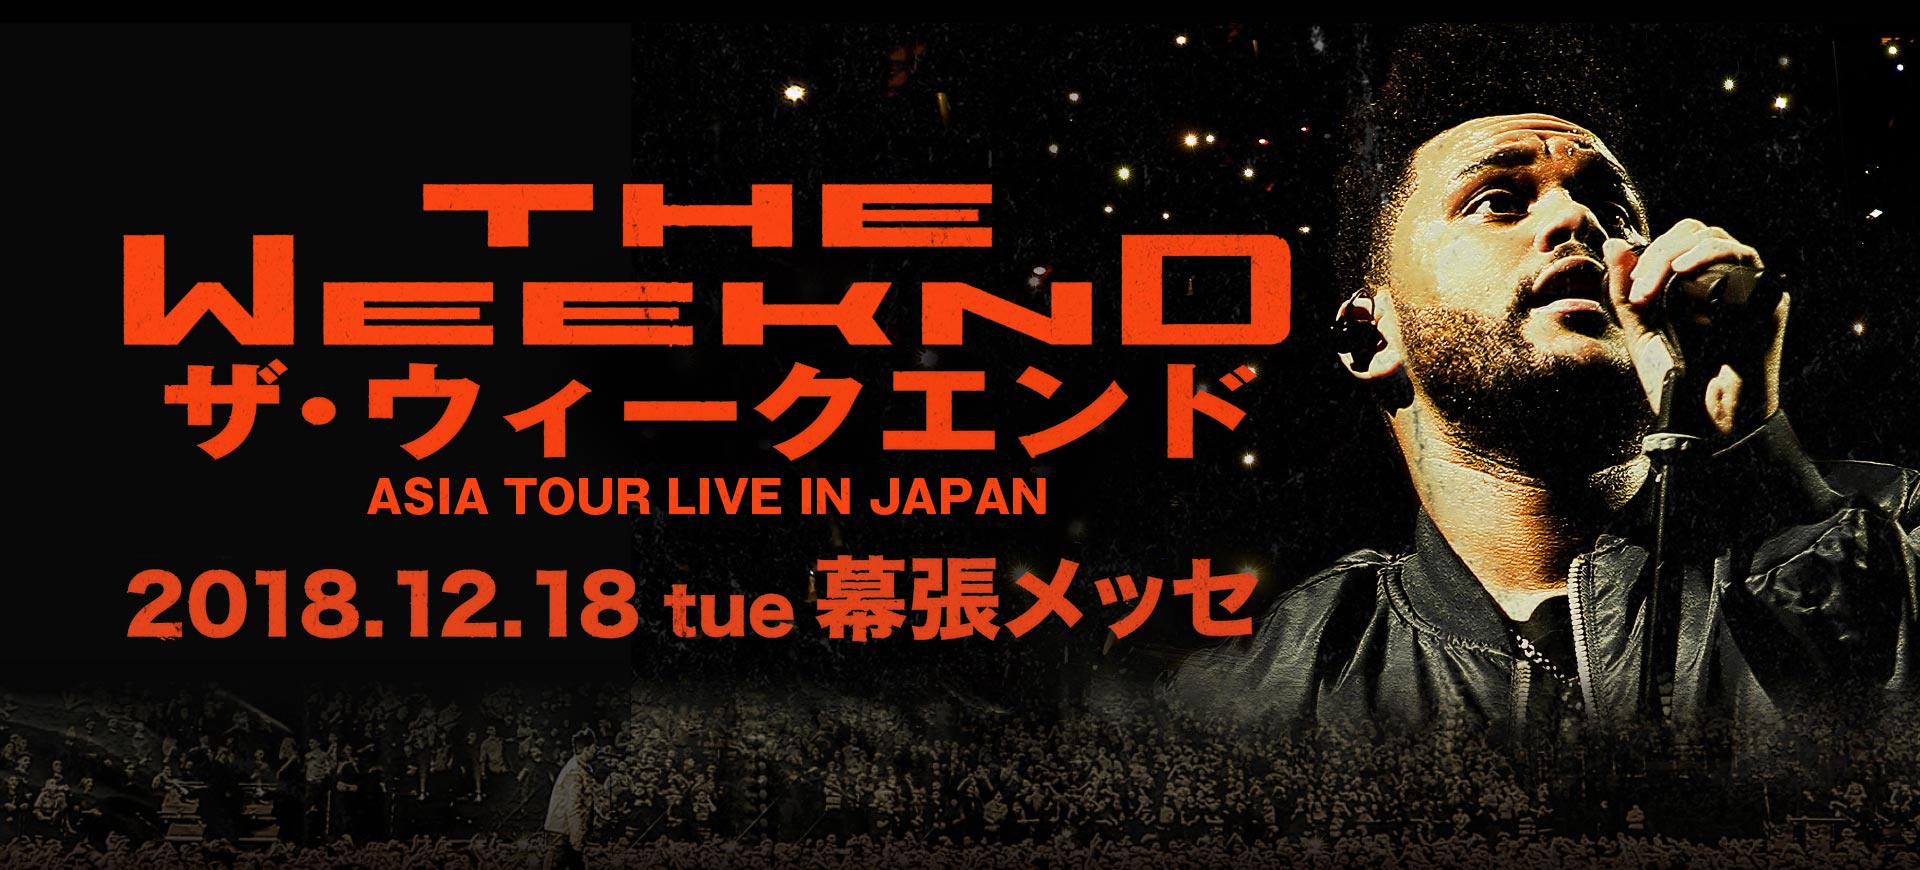 THE WEEKND ASIA LIVE IN JAPAN 来日公演特設サイト